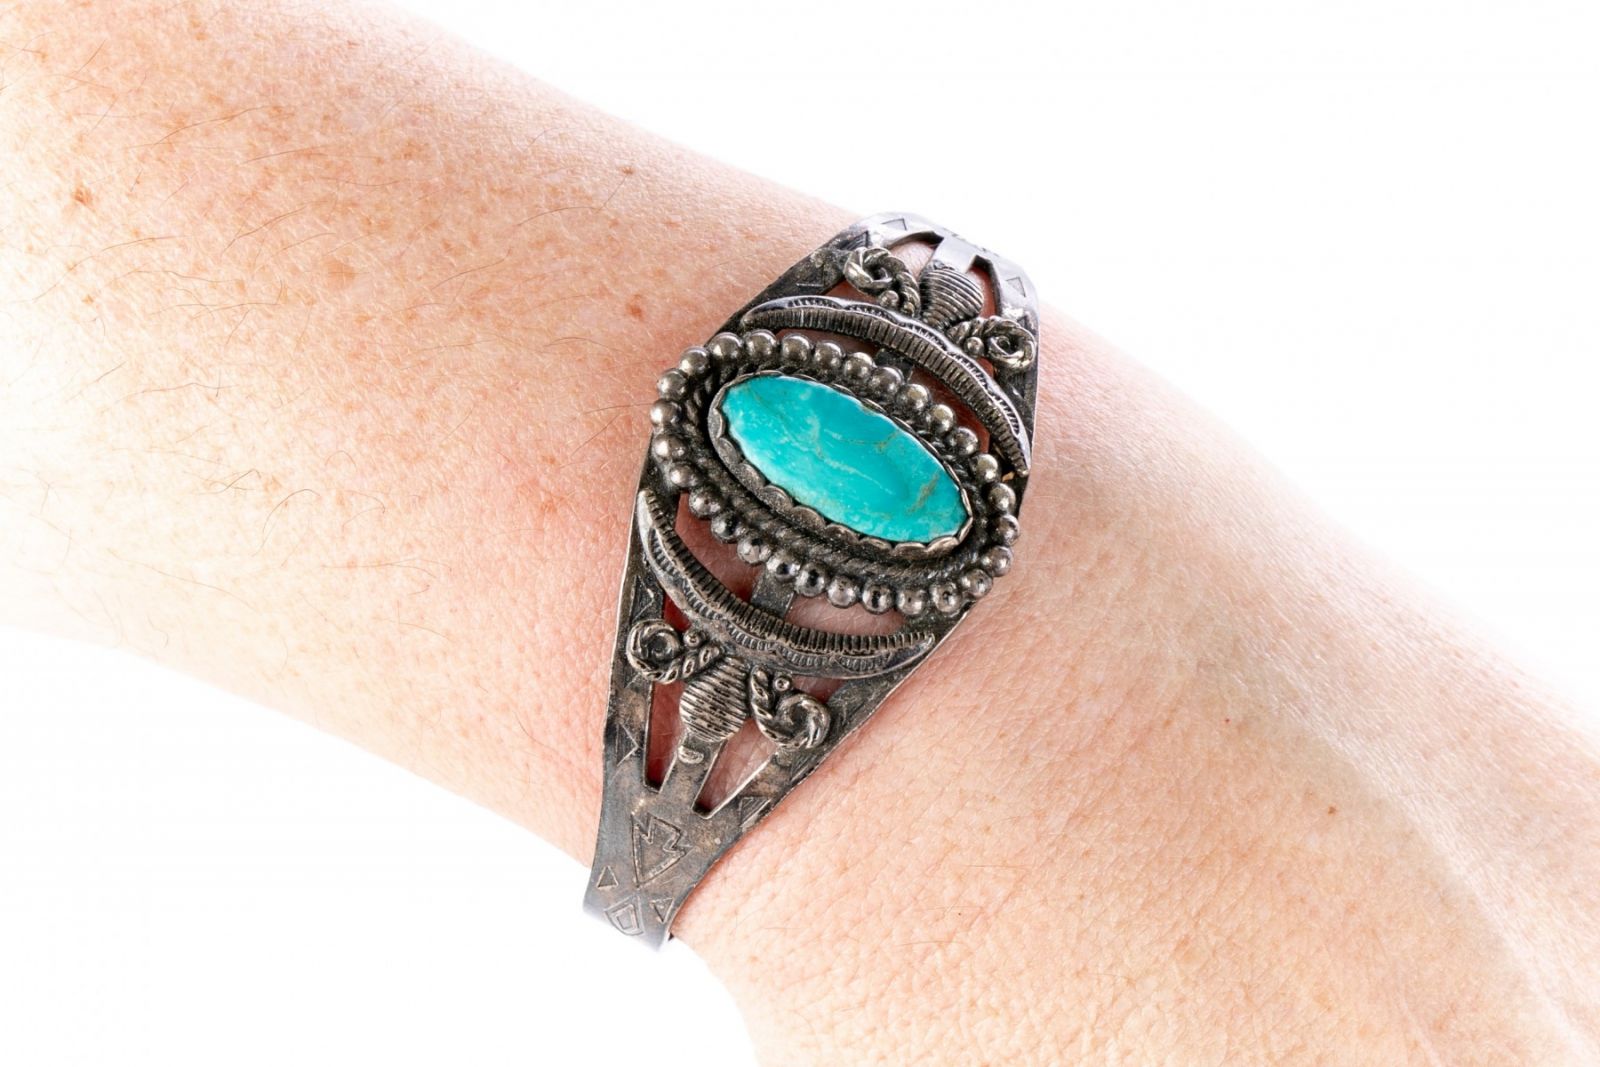 Native American jewelry and sterling silver cuff with turquoise